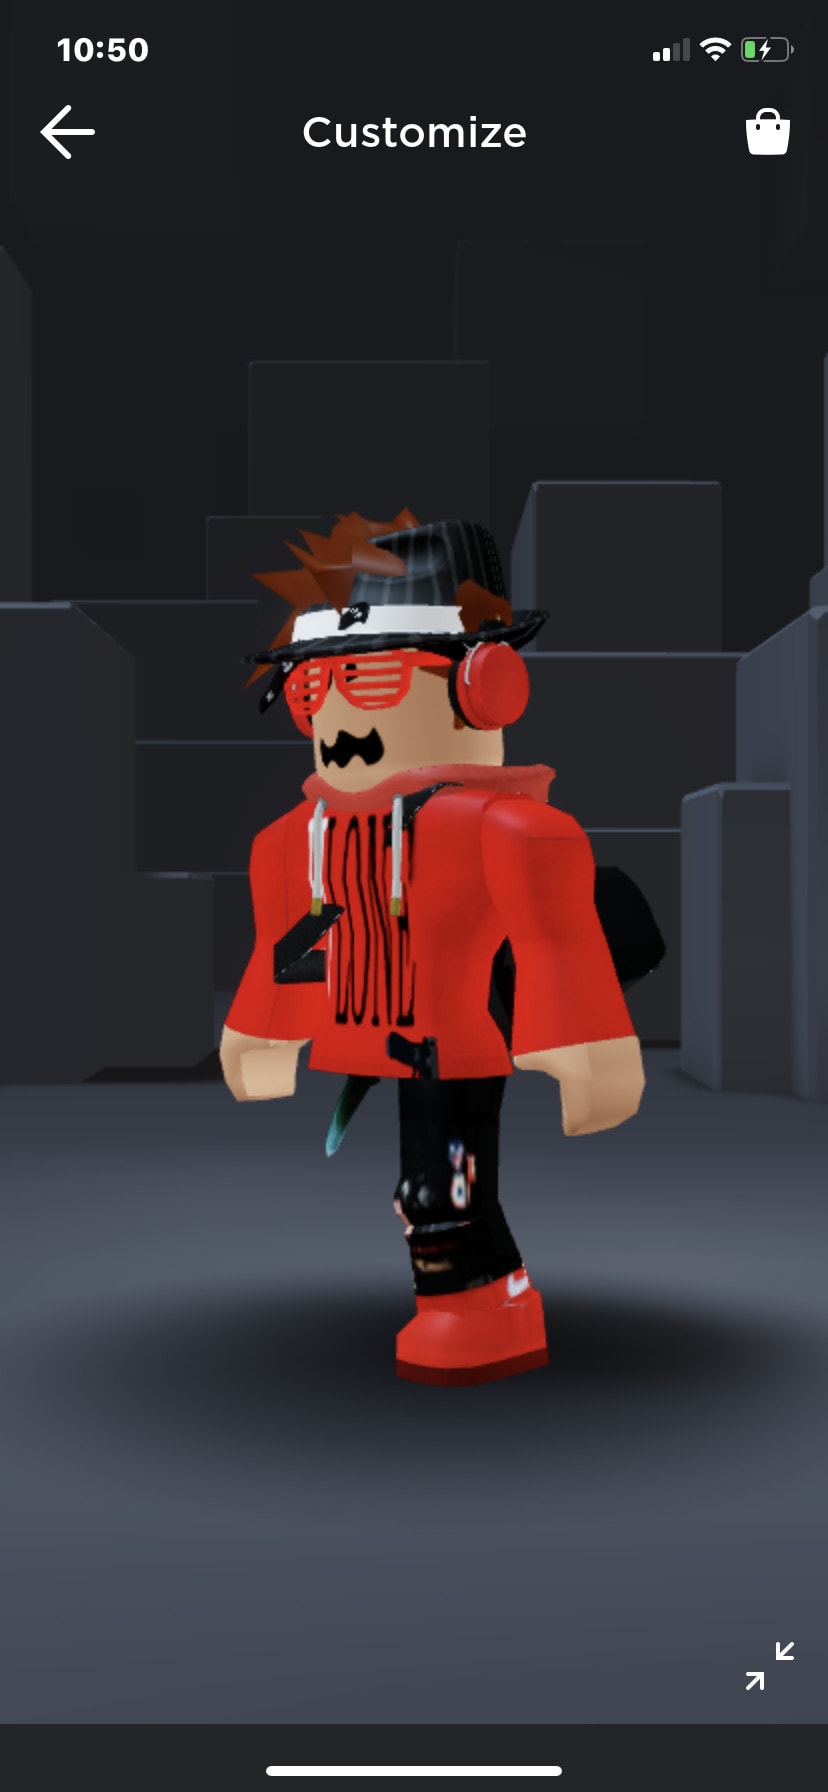 Make custom high quality roblox clothing for you by Vegacaad